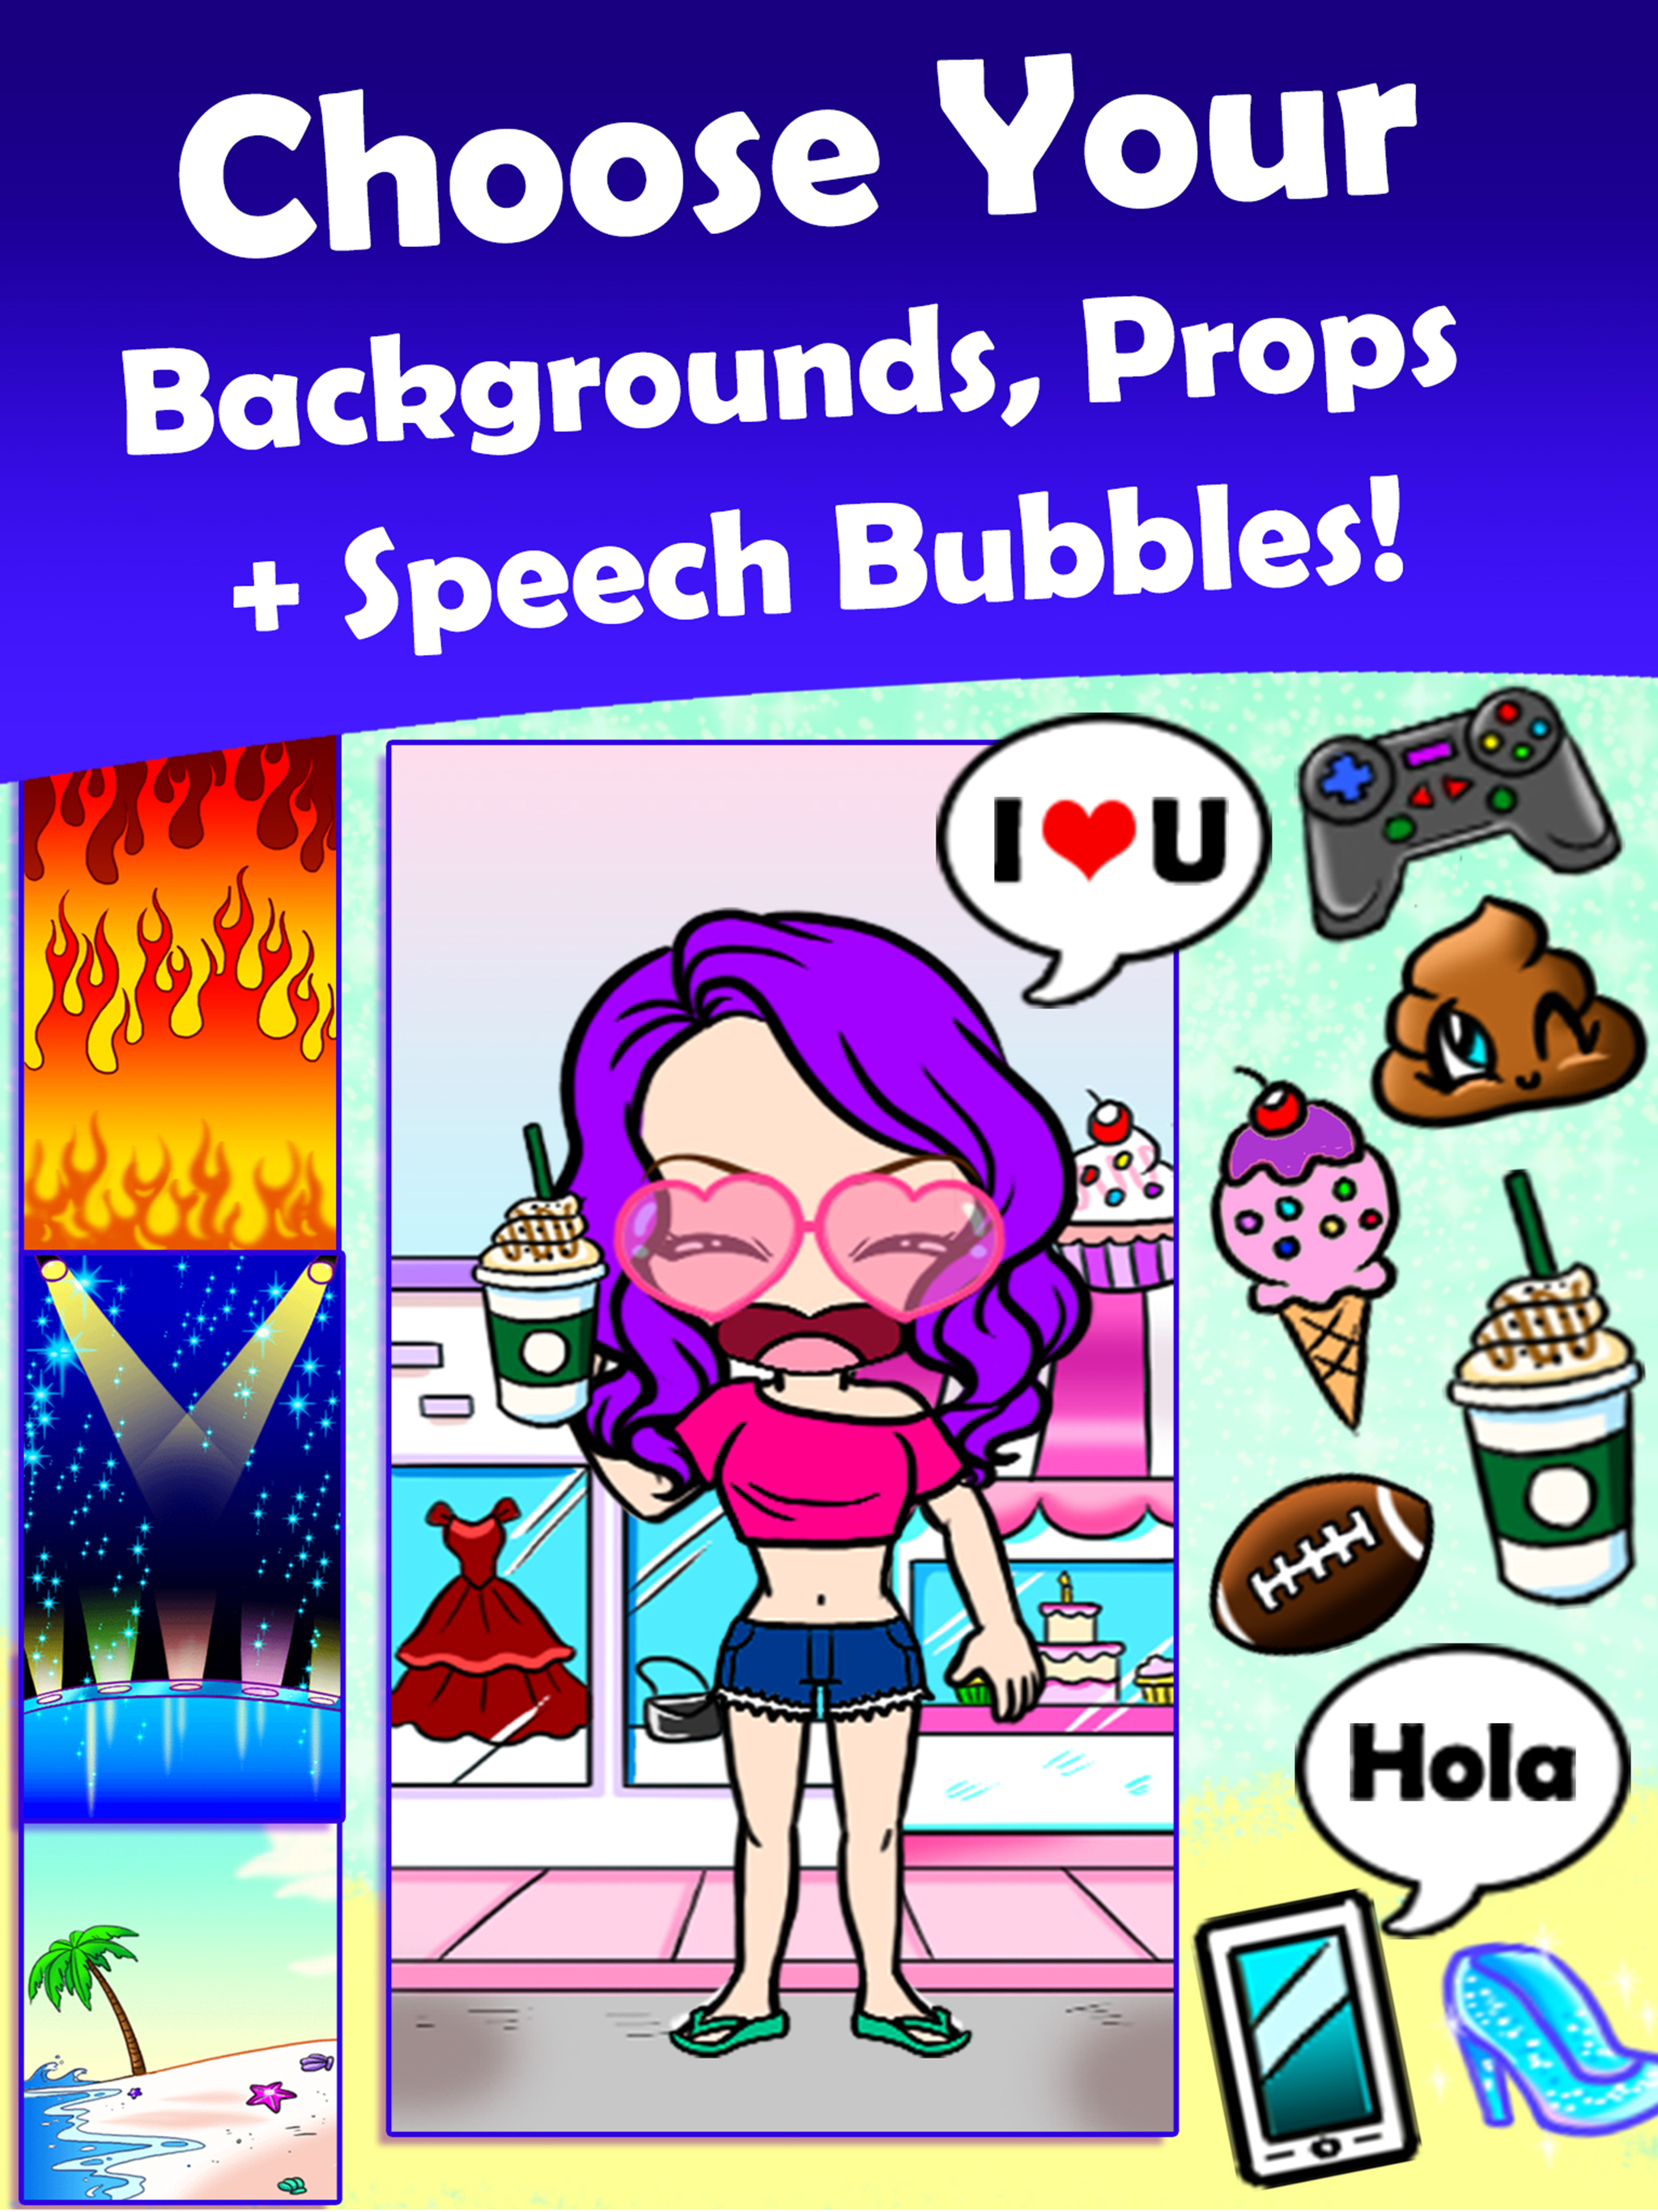 Choose your backgrounds, props, and speech bubbles!